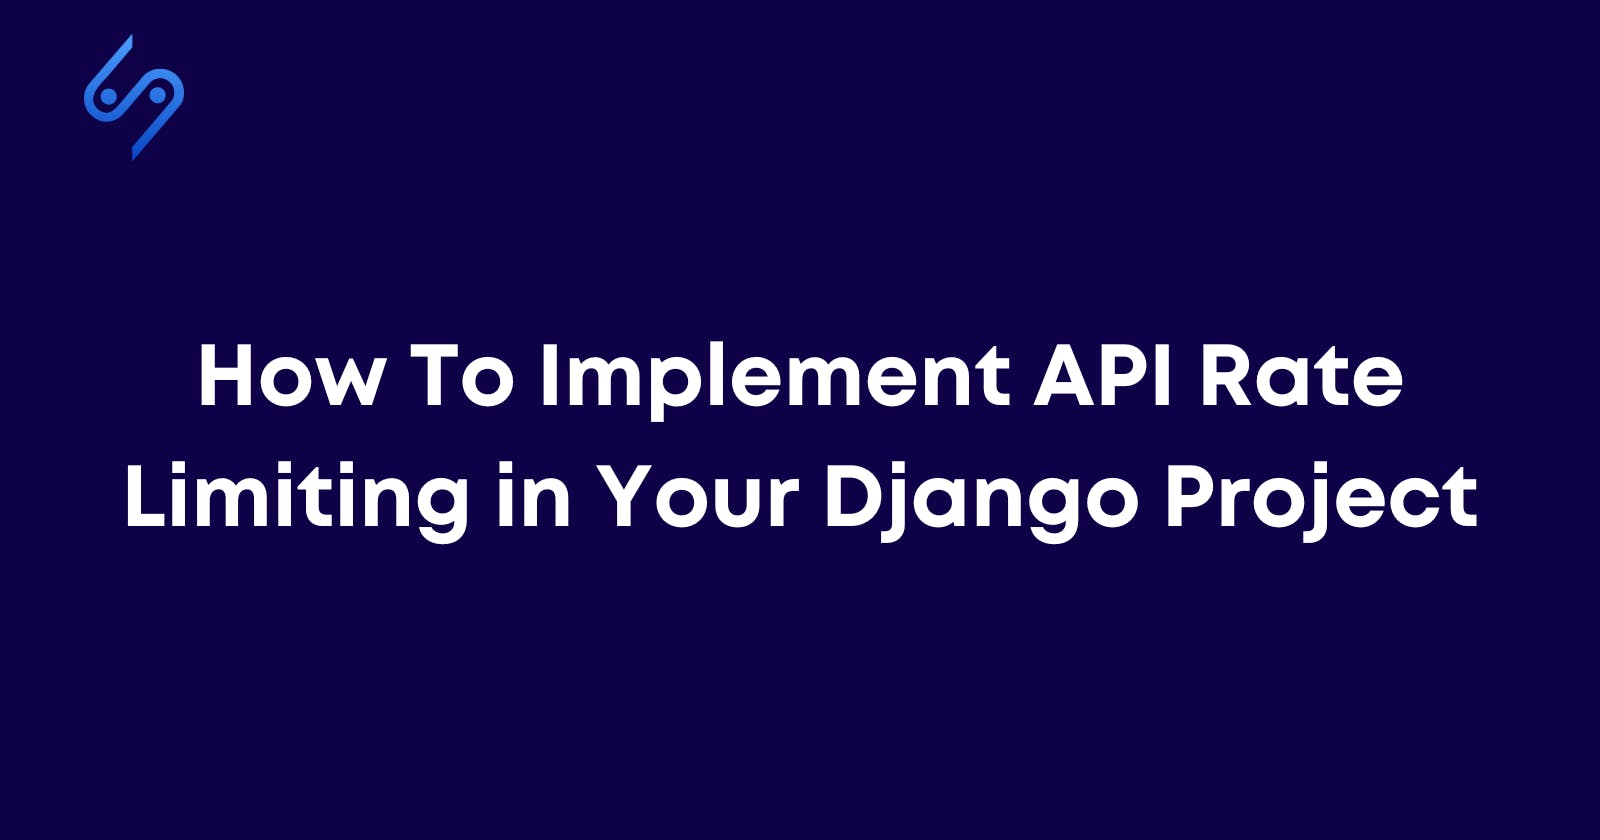 How To Implement API Rate Limiting in Your Django Project